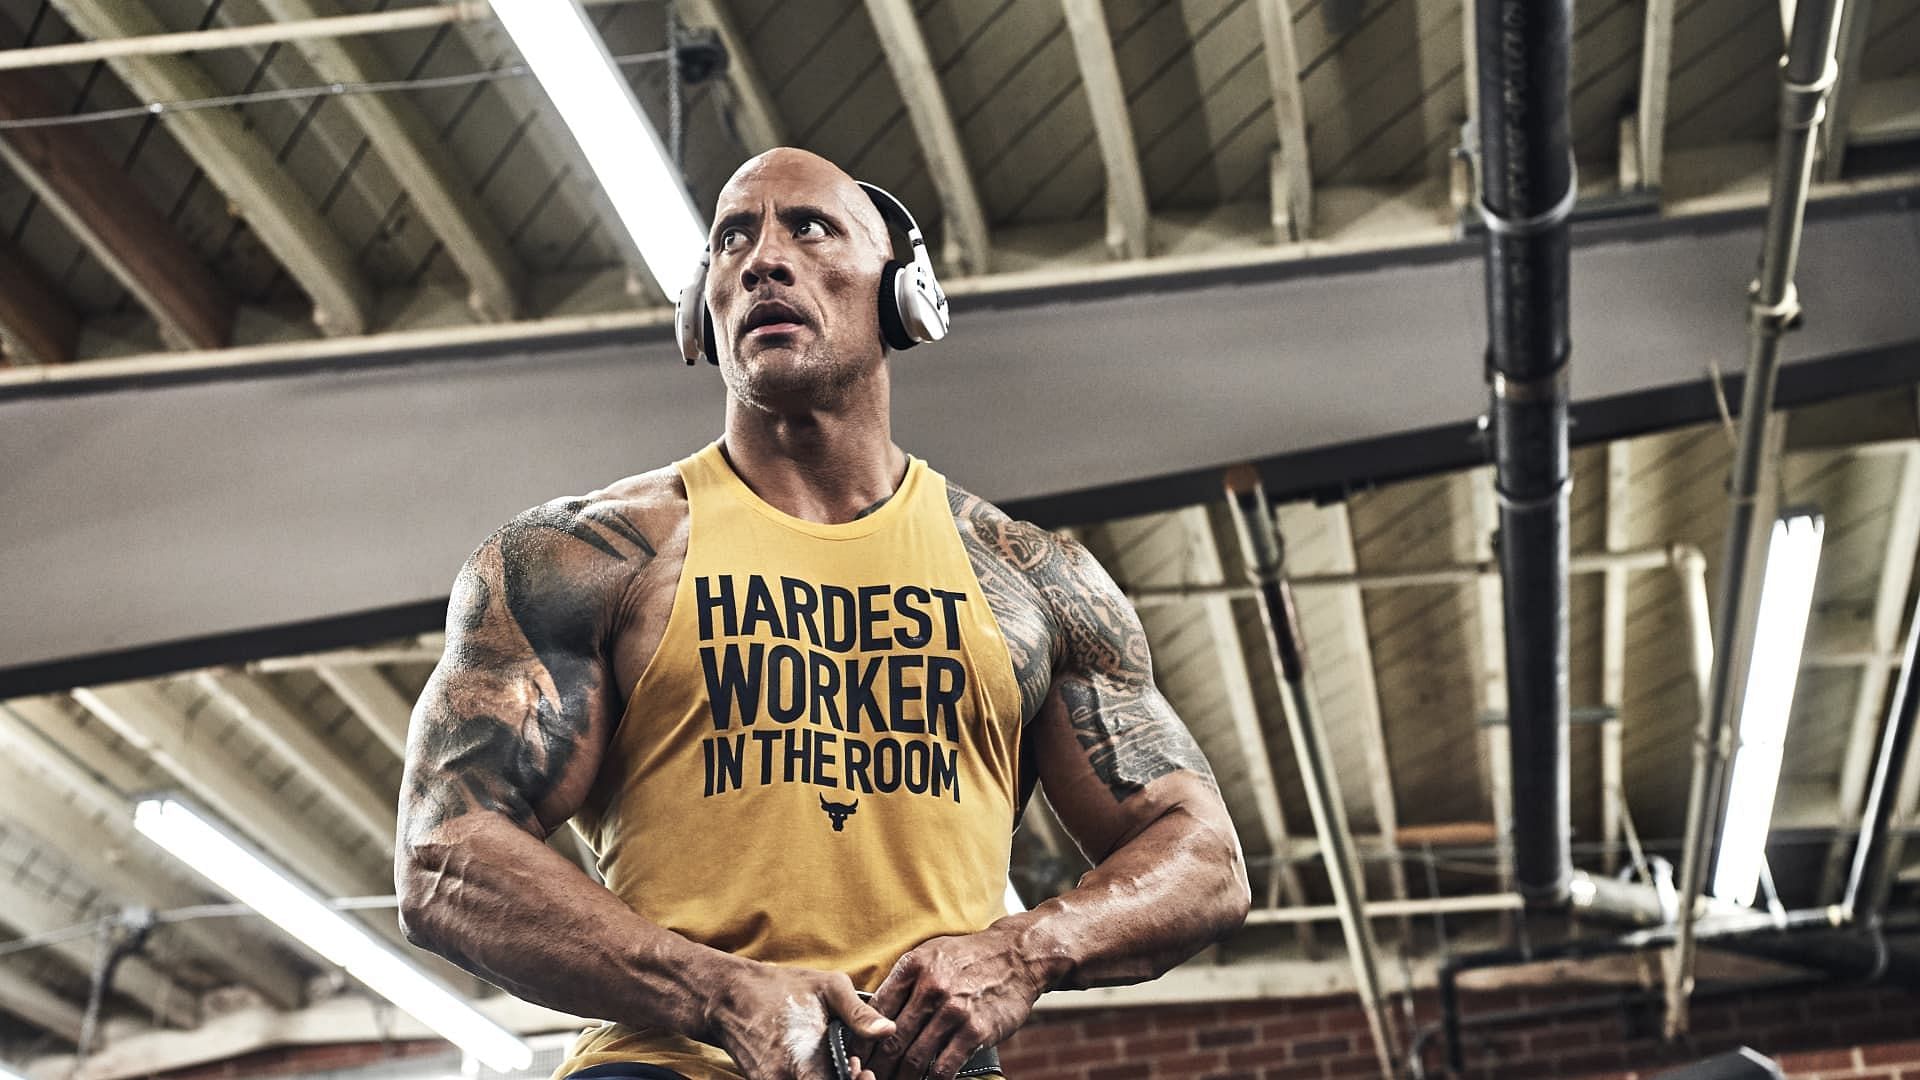 The Rock is a 10-time WWE Champion